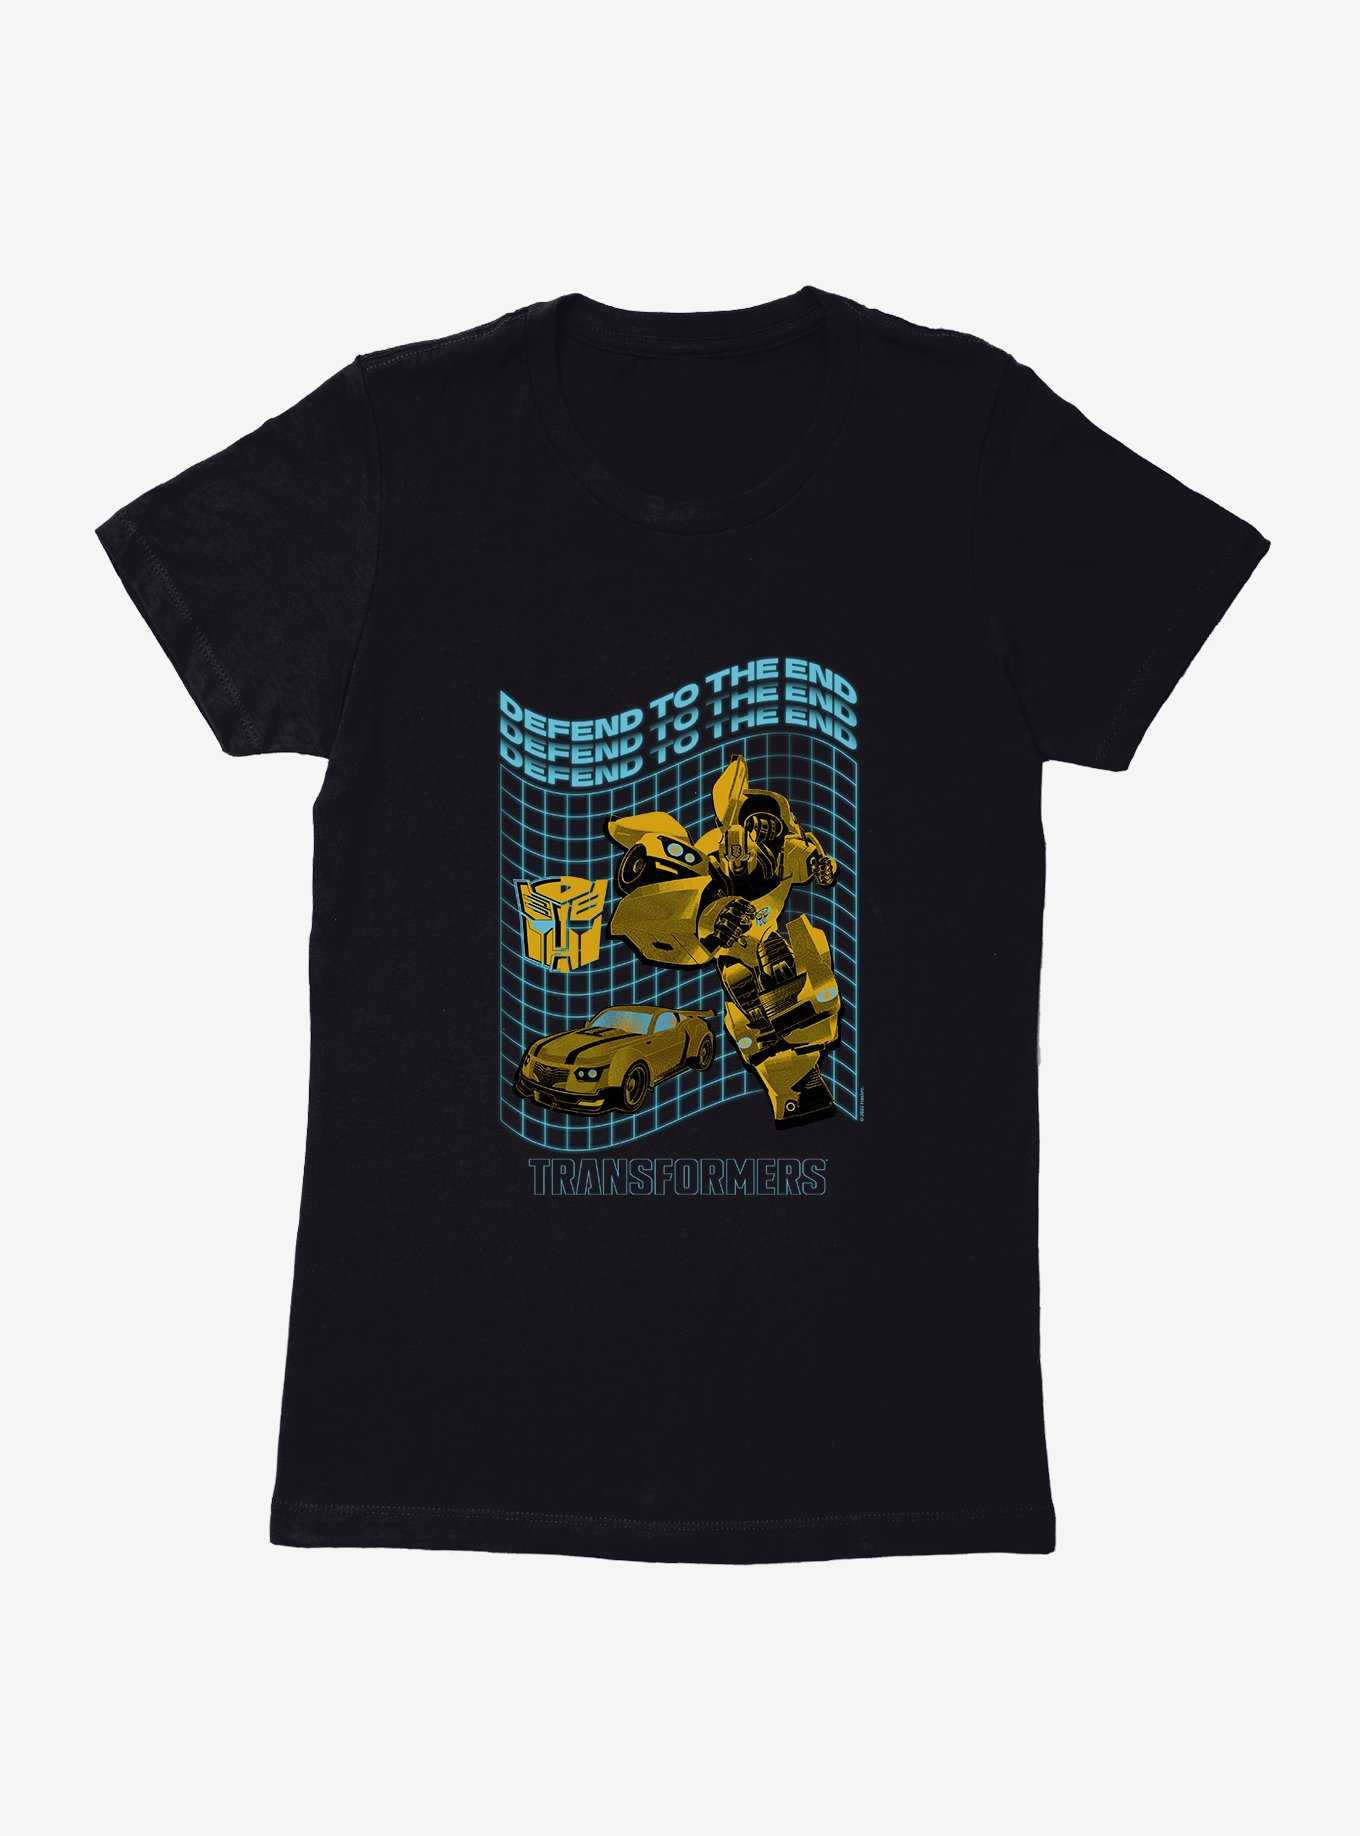 Transformers Defend To The End Bumblebee Womens T-Shirt, , hi-res